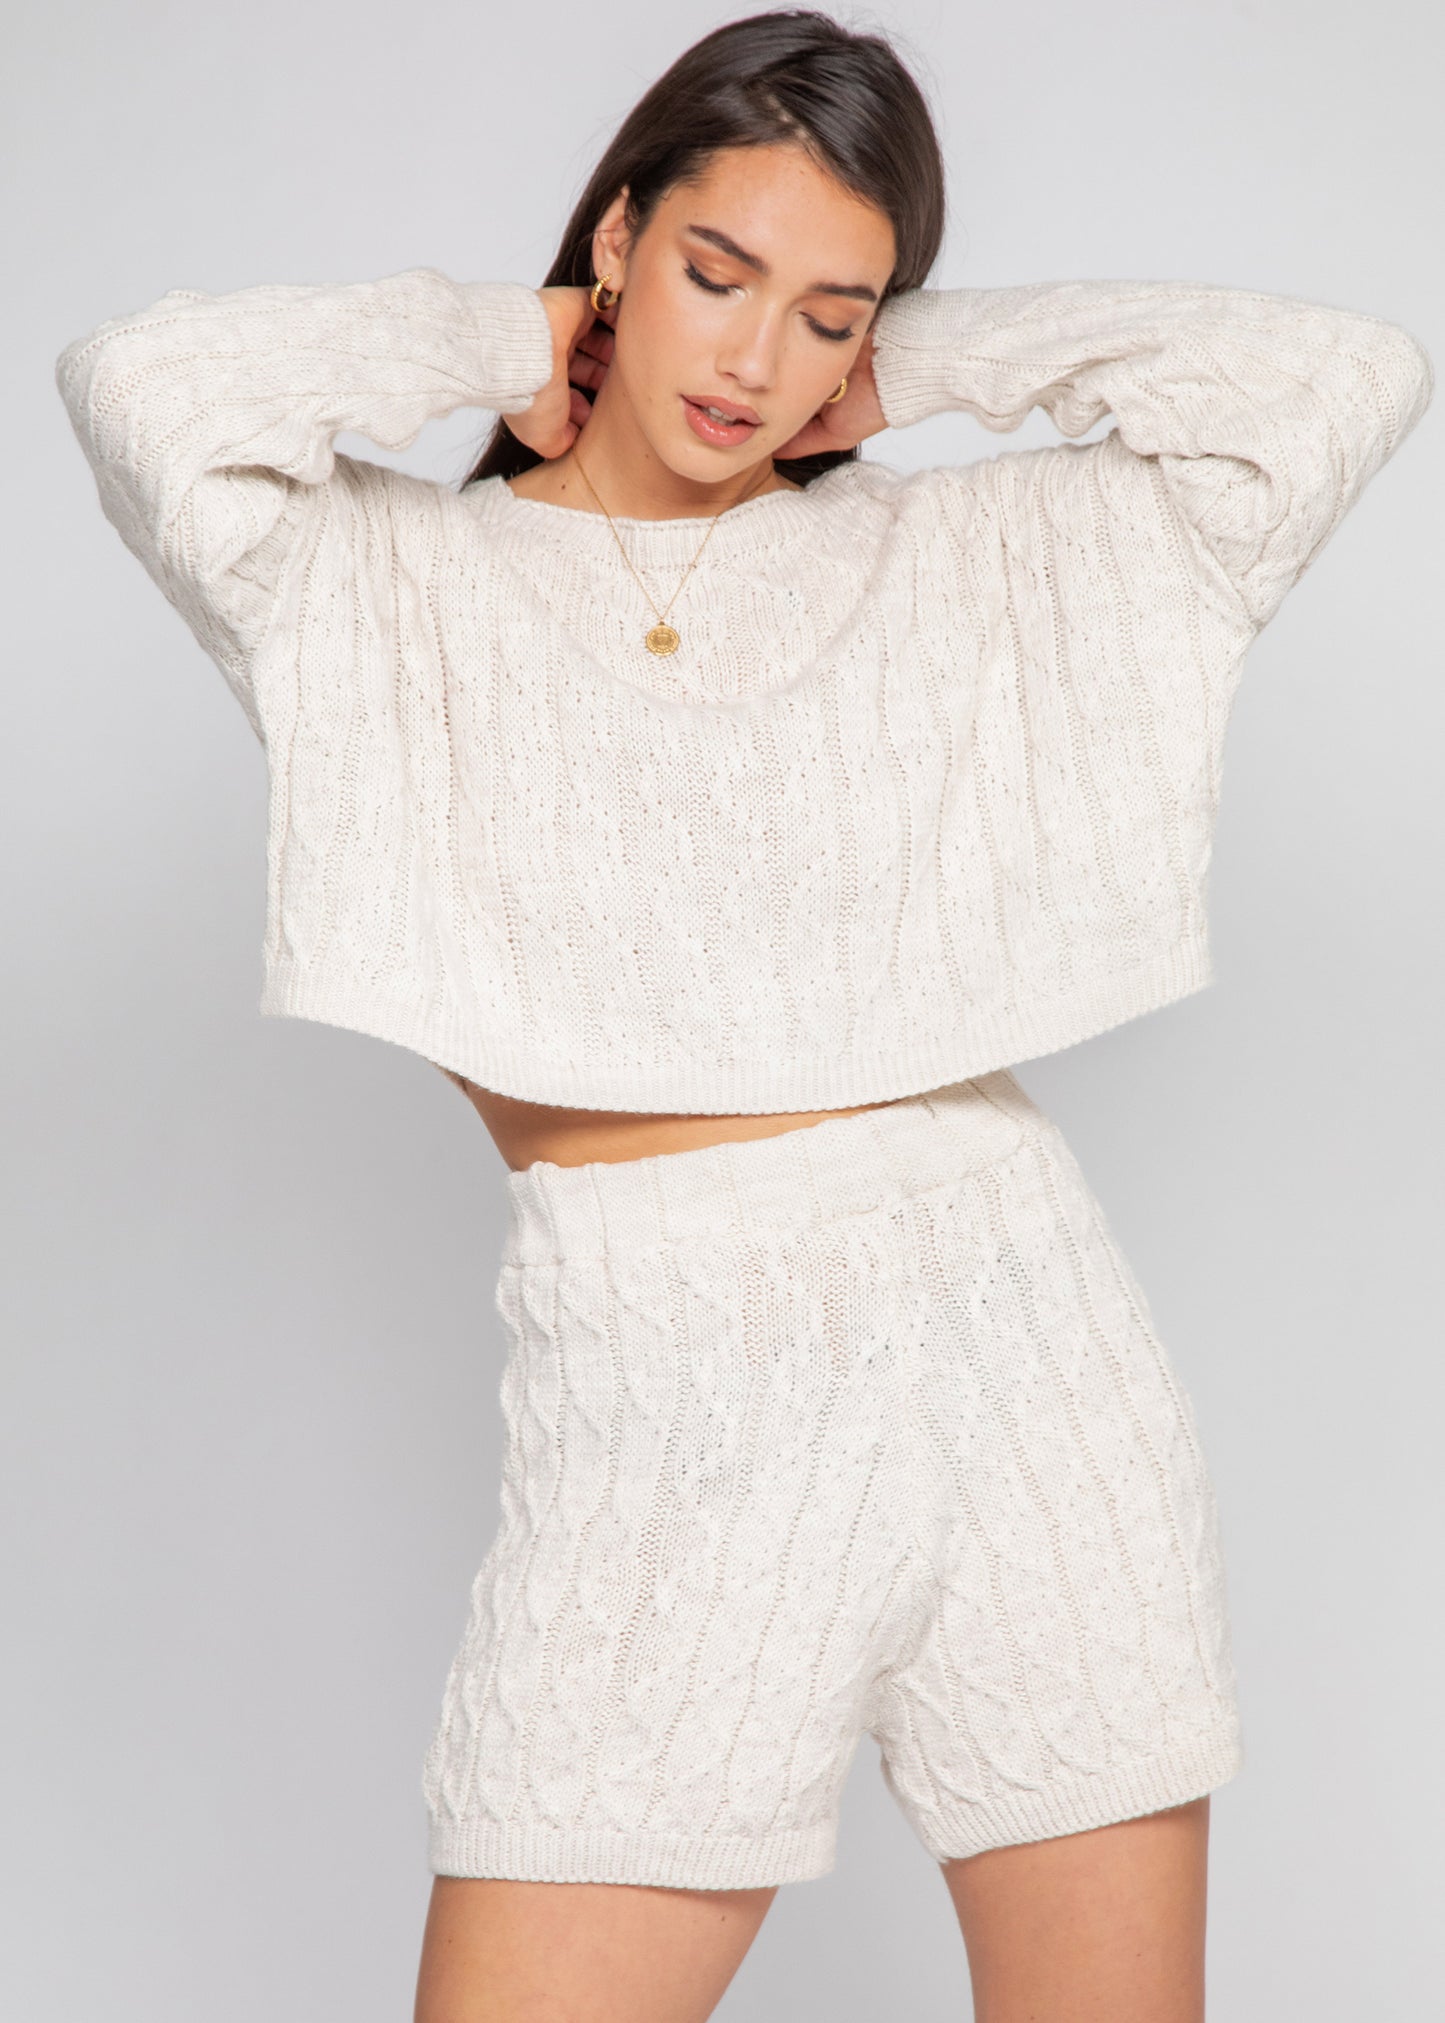 Cable knit jumper and shorts co-ord in beige